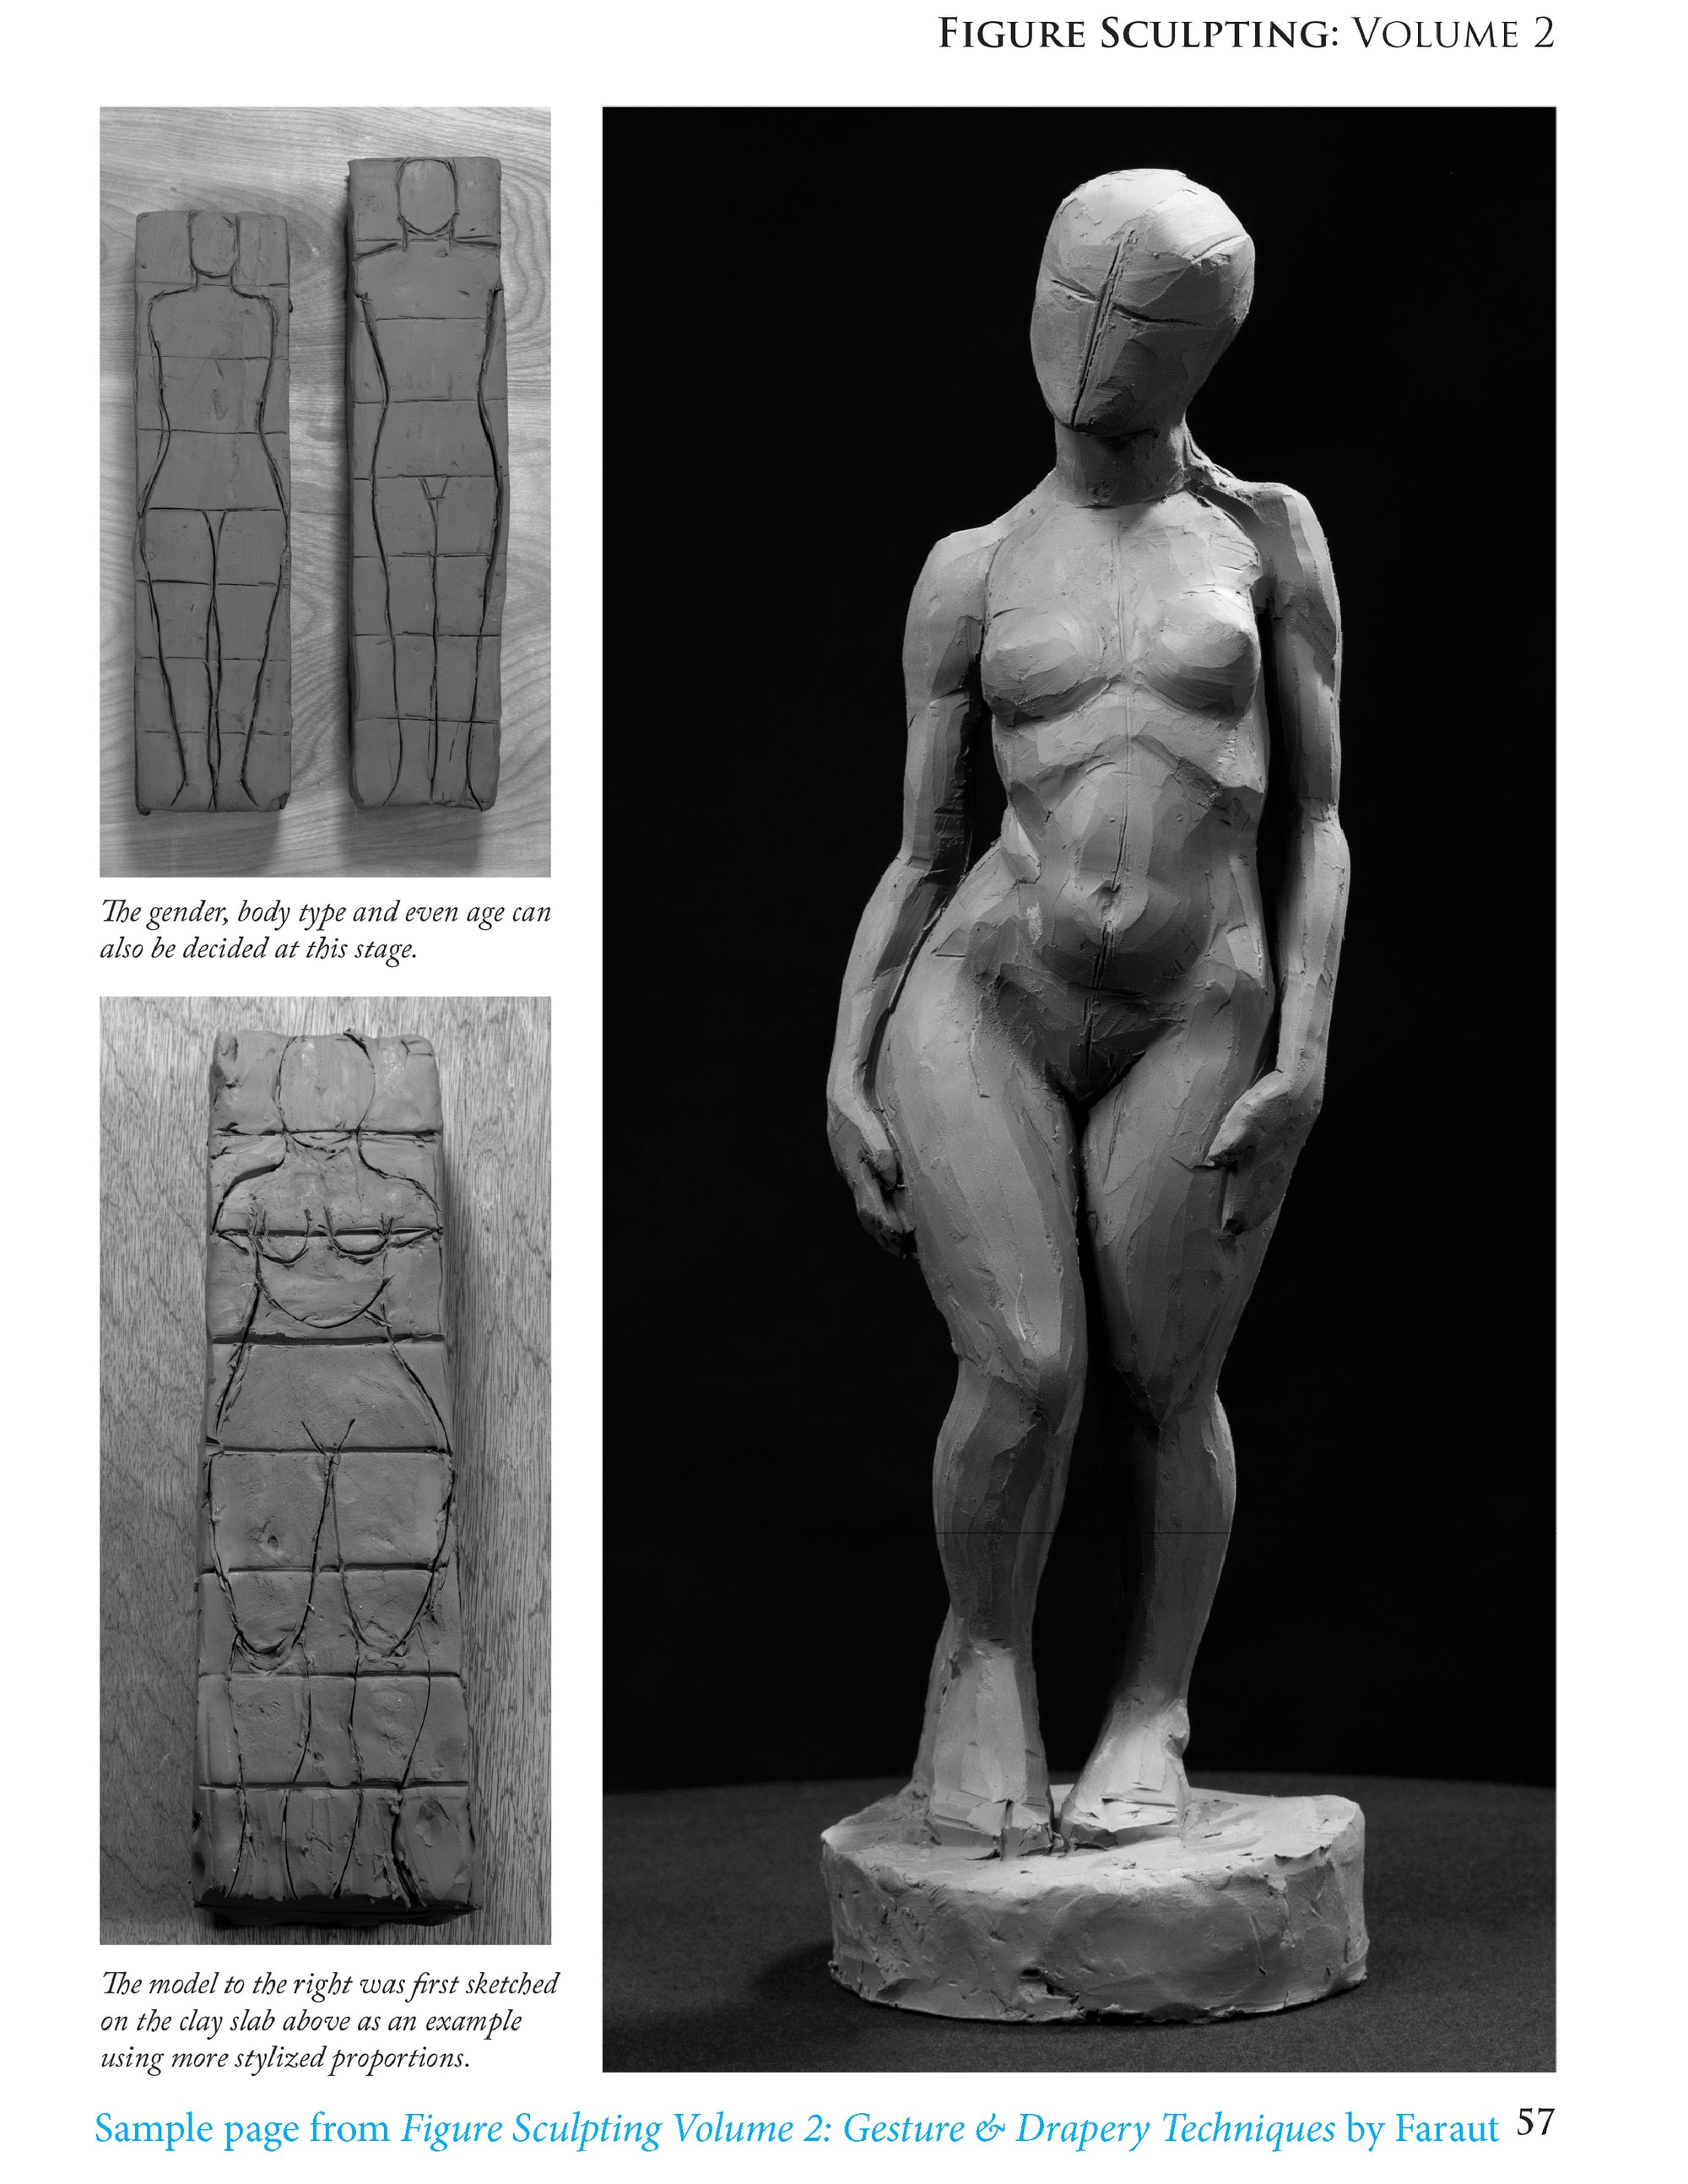  Sample page from book: Figure Sculpting Volume 2 by Faraut showing figure proportions